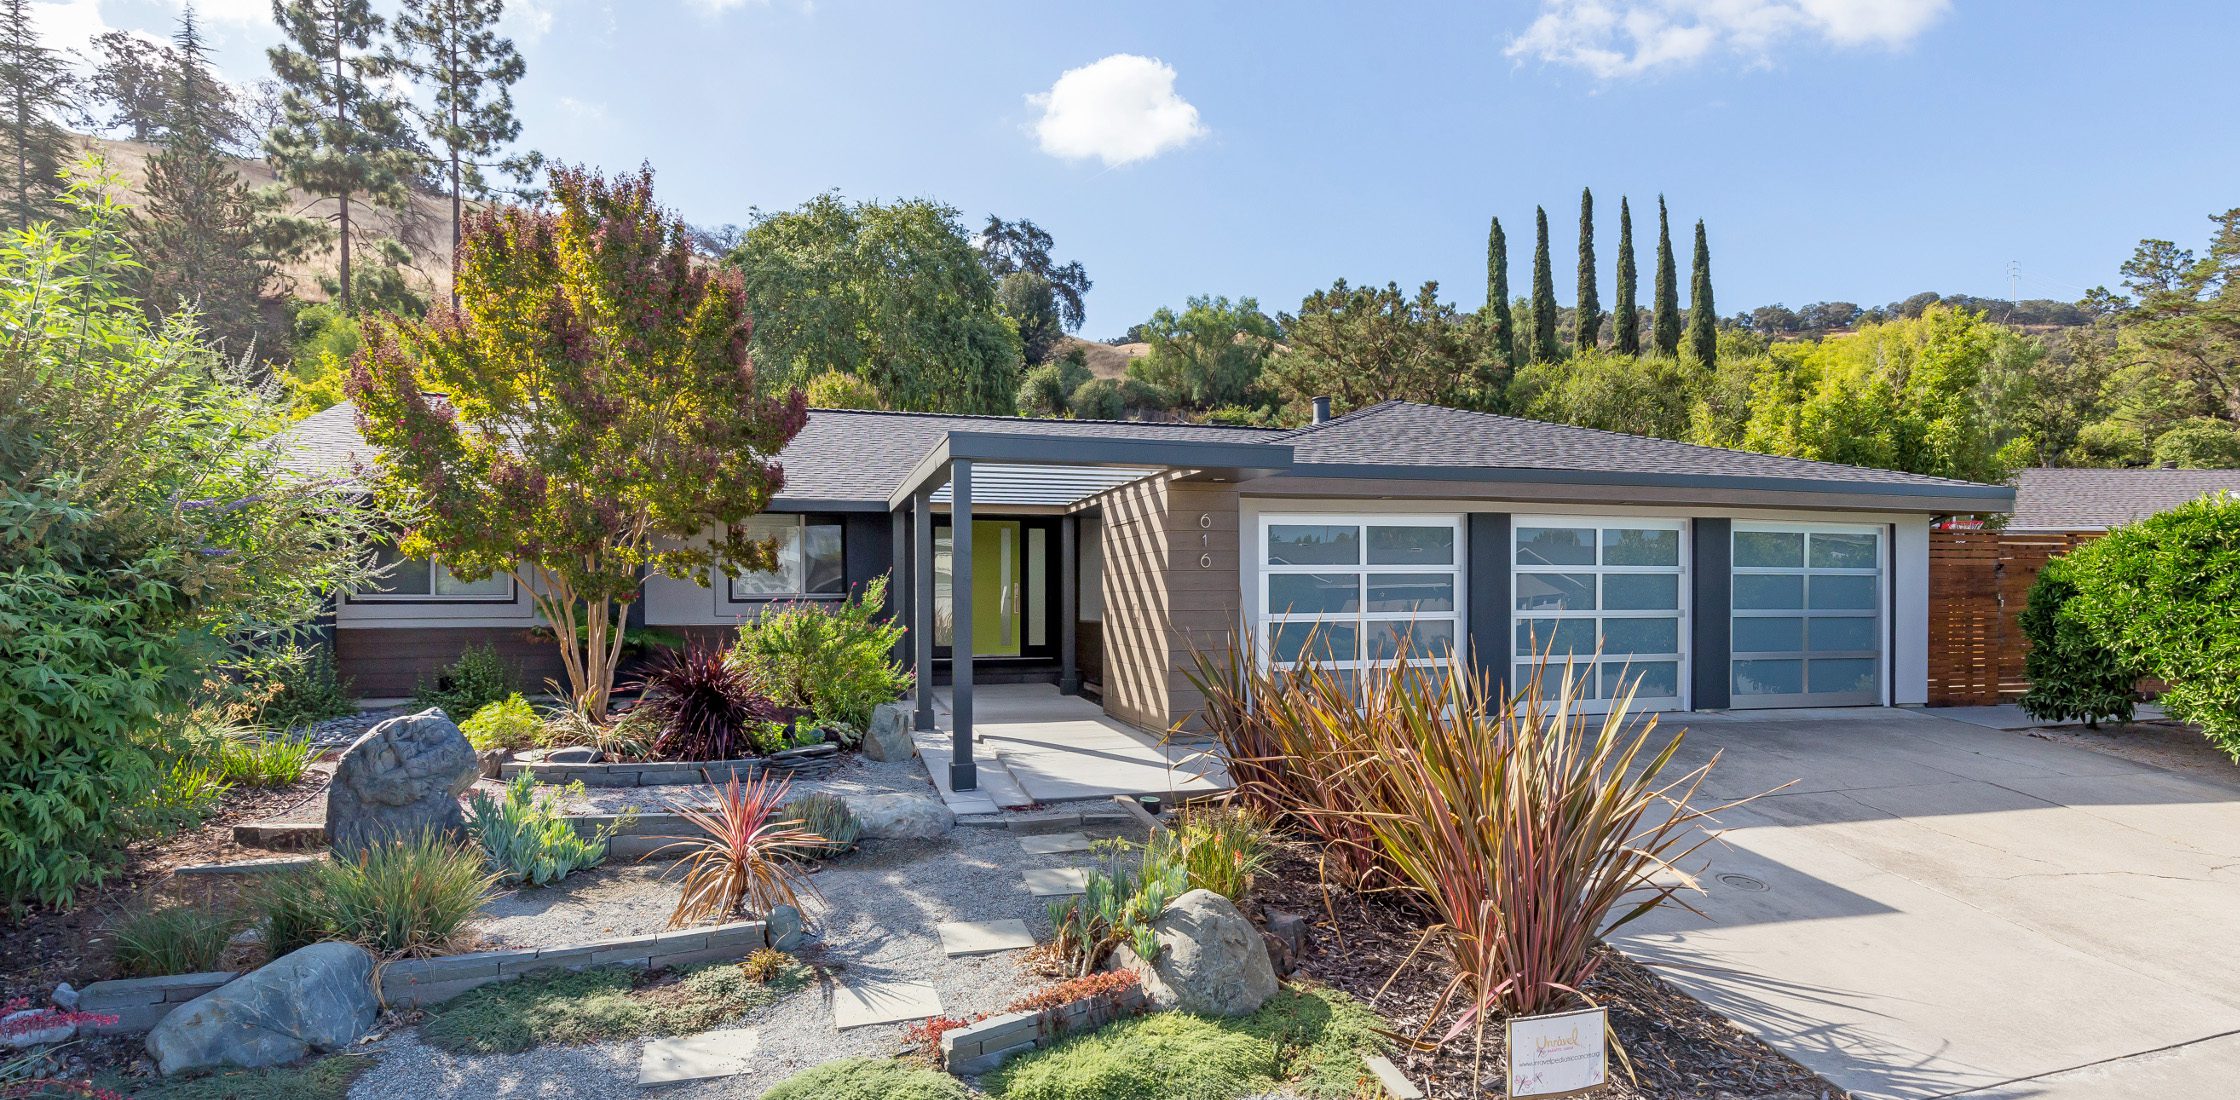 Home-exterior-design-in-Silicon-Valley-with-a-modern-curb-appeal